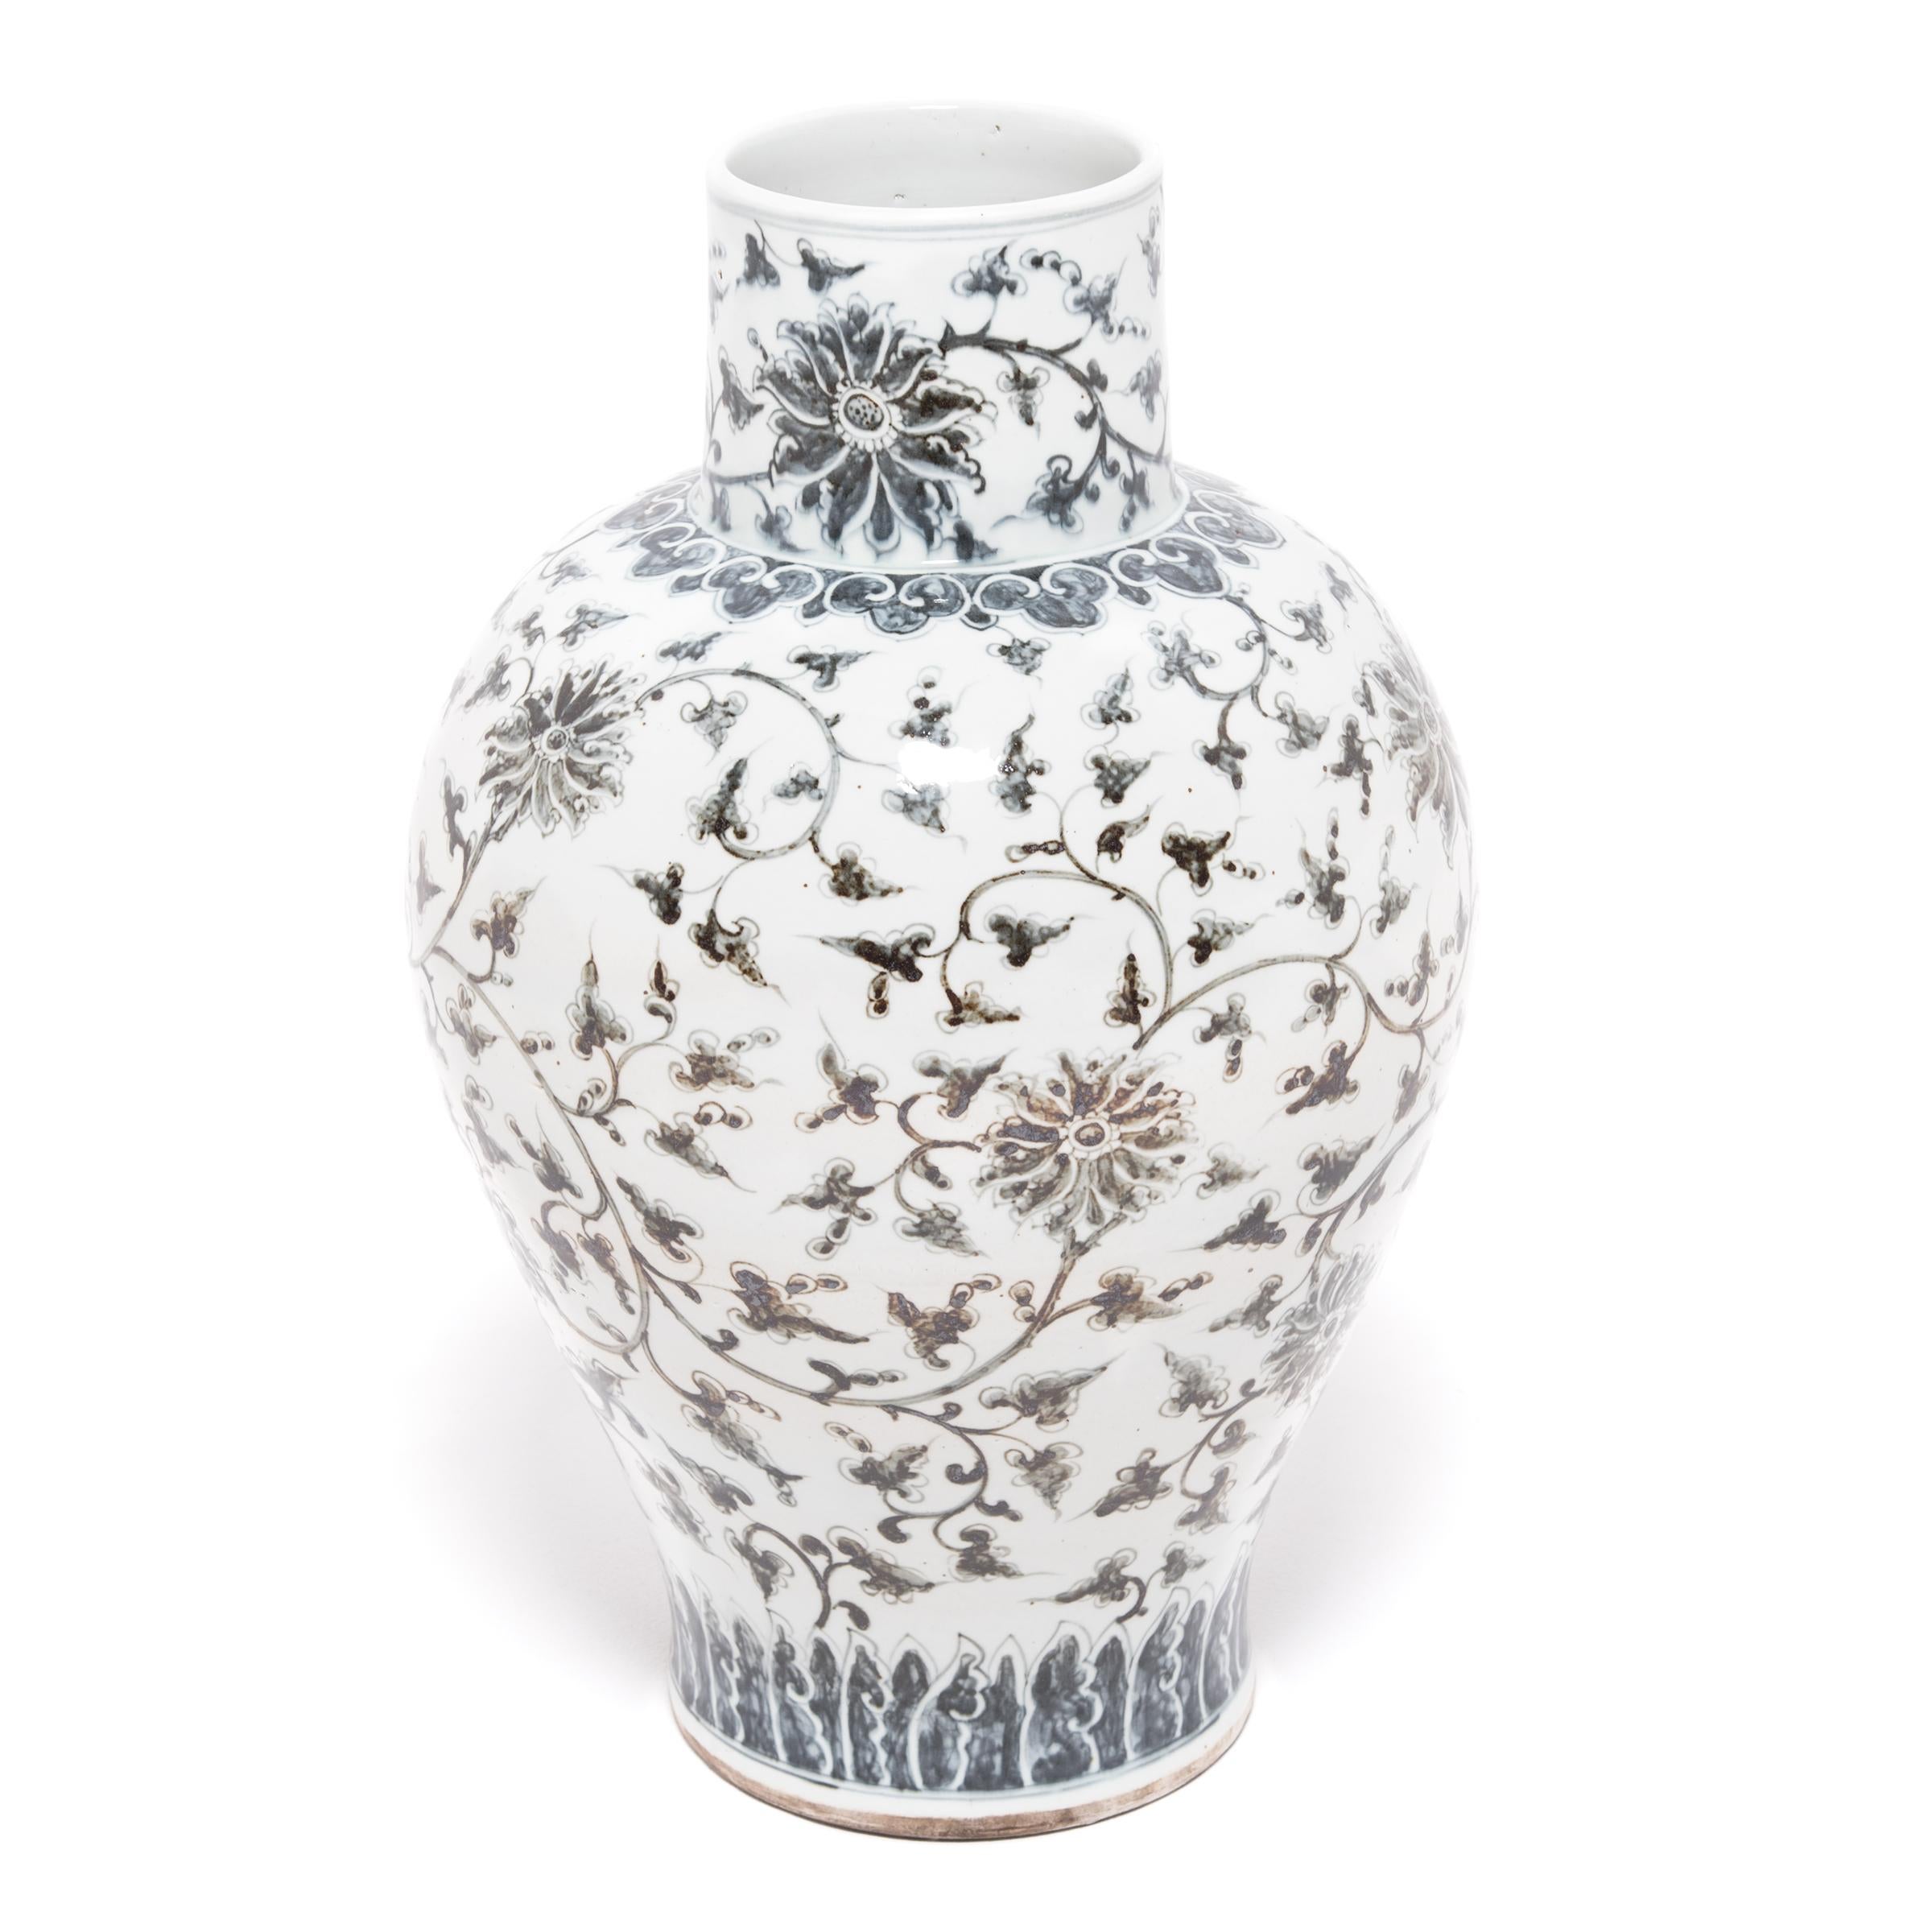 Representing royalty and virtue, peonies in full bloom grace the rounded sides of this large porcelain jar. The jar has a tapered body and a cylindrical neck, decorated with a contemporary interpretation of the traditional trailing vine scroll